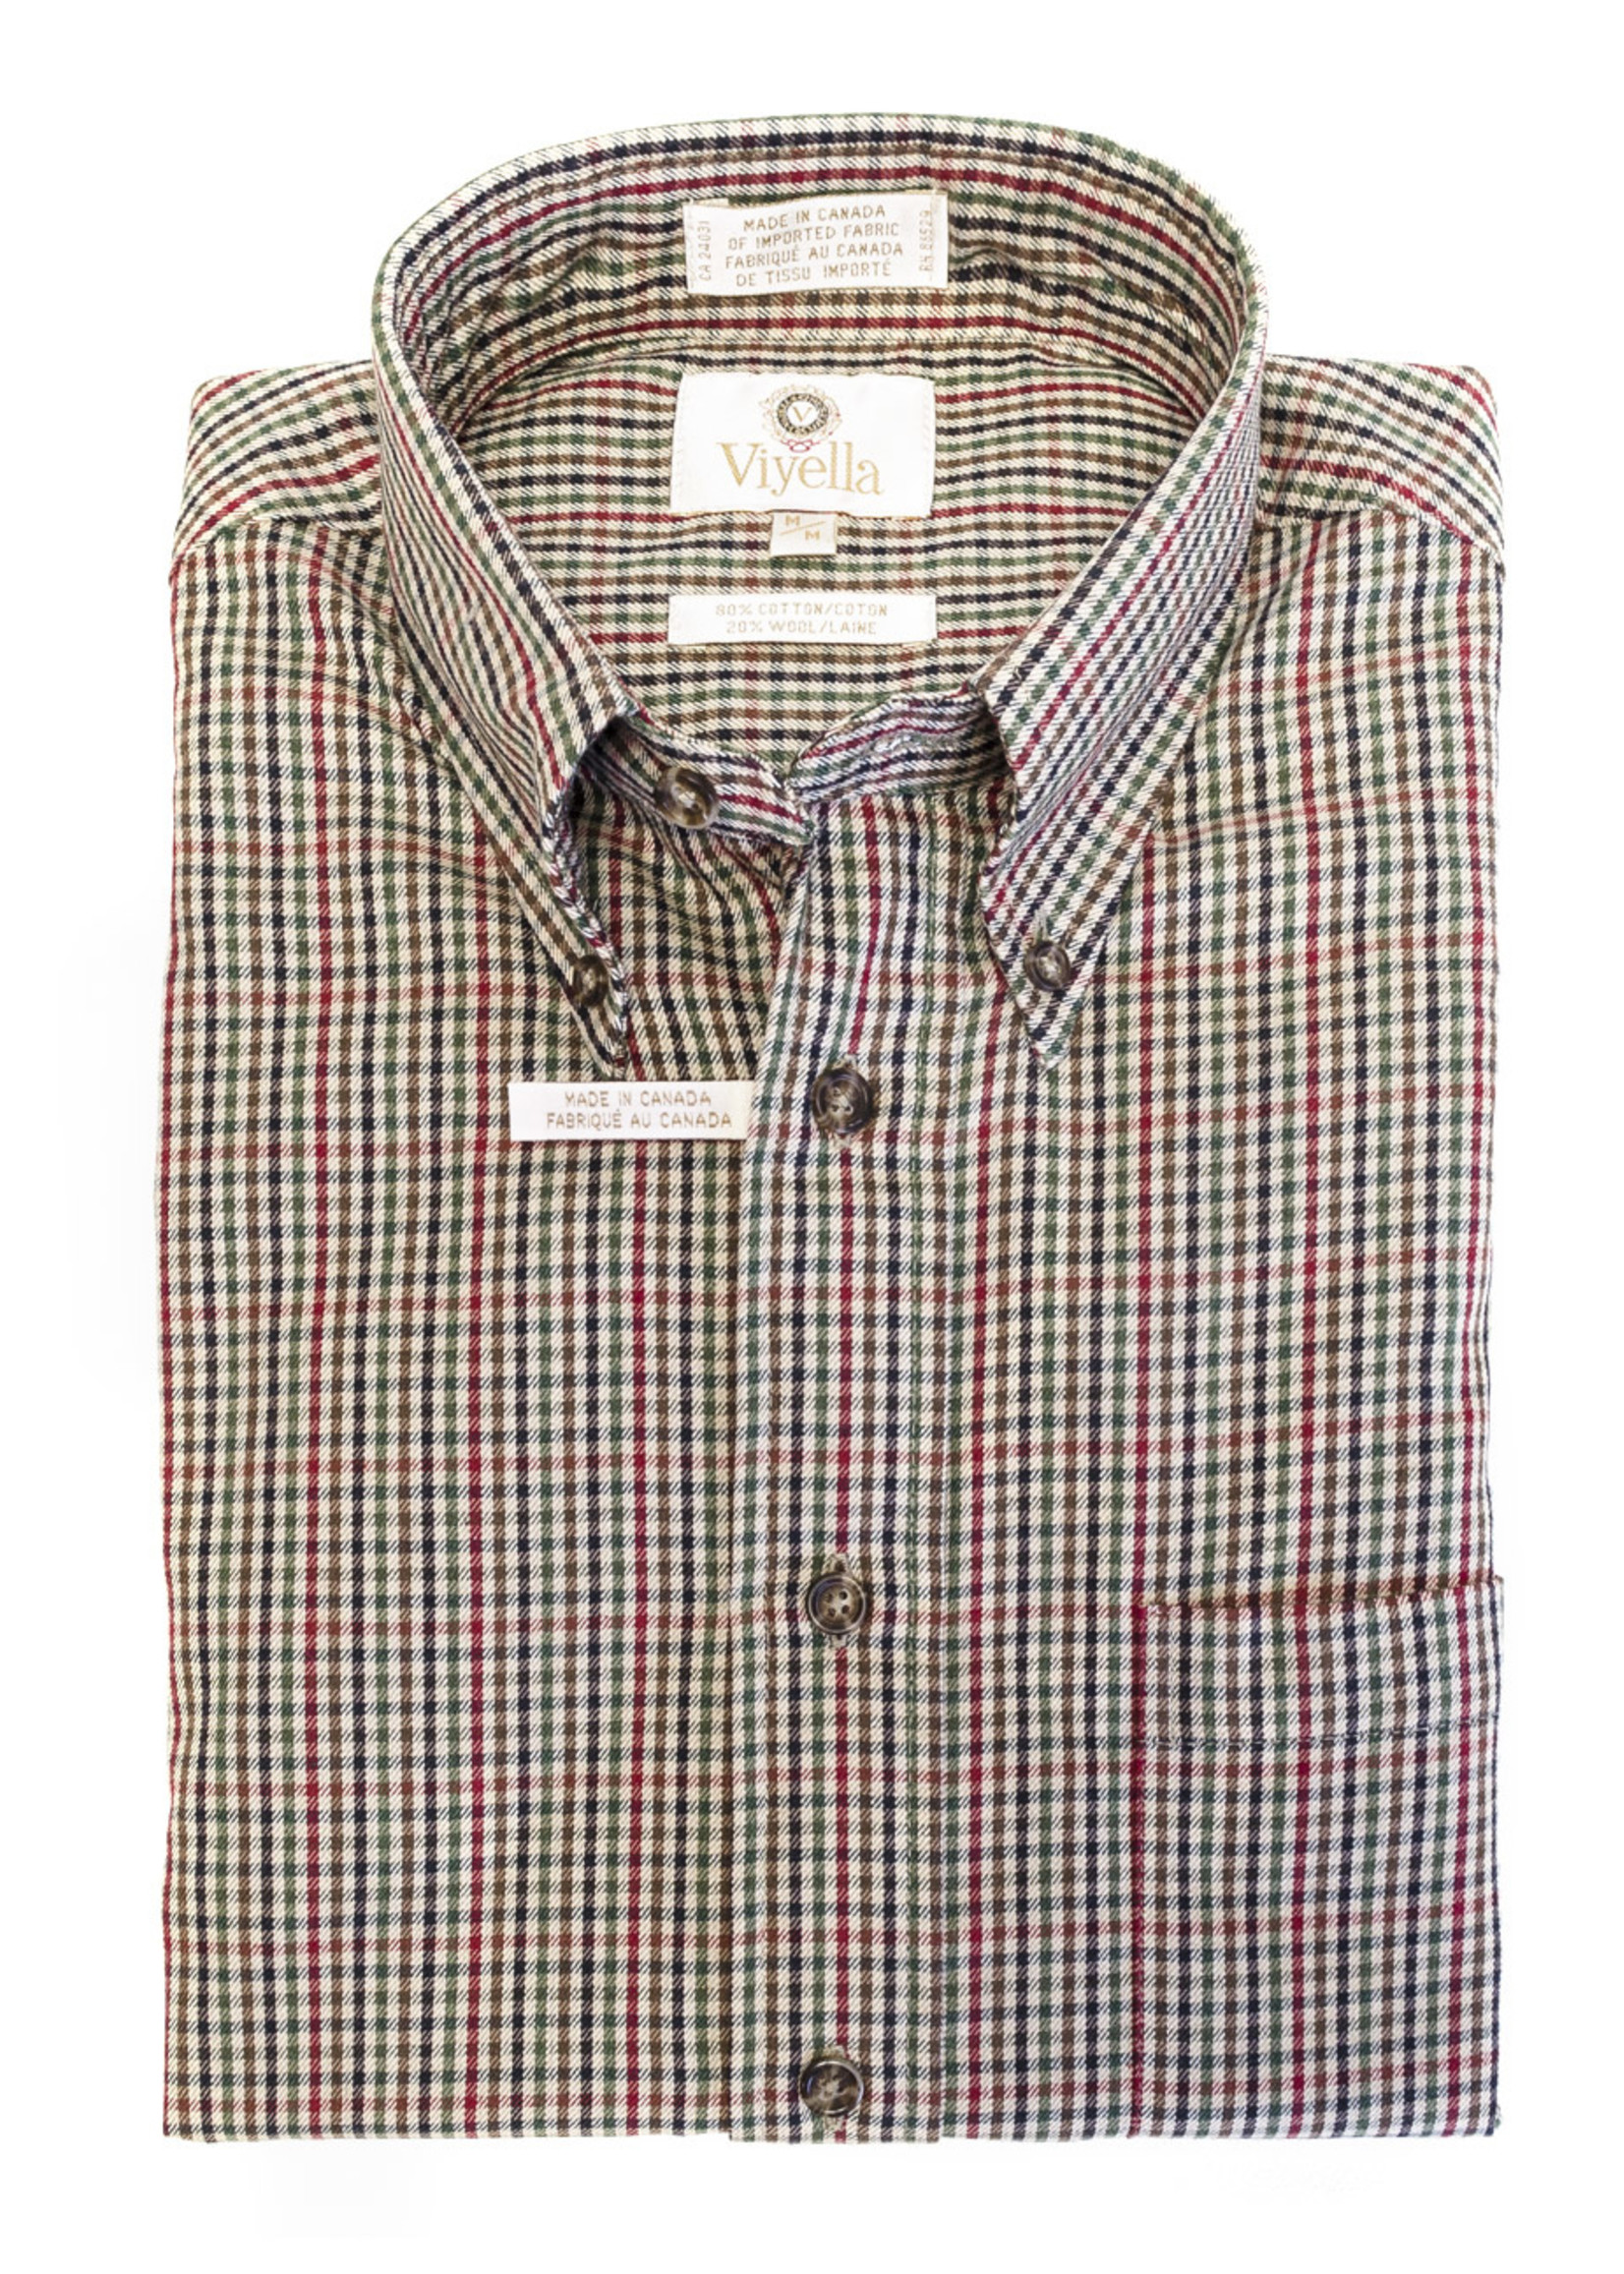 VIYELLA TAN AND RED CHECK COTTON AND WOOL BLEND BUTTON-DOWN SHIRT